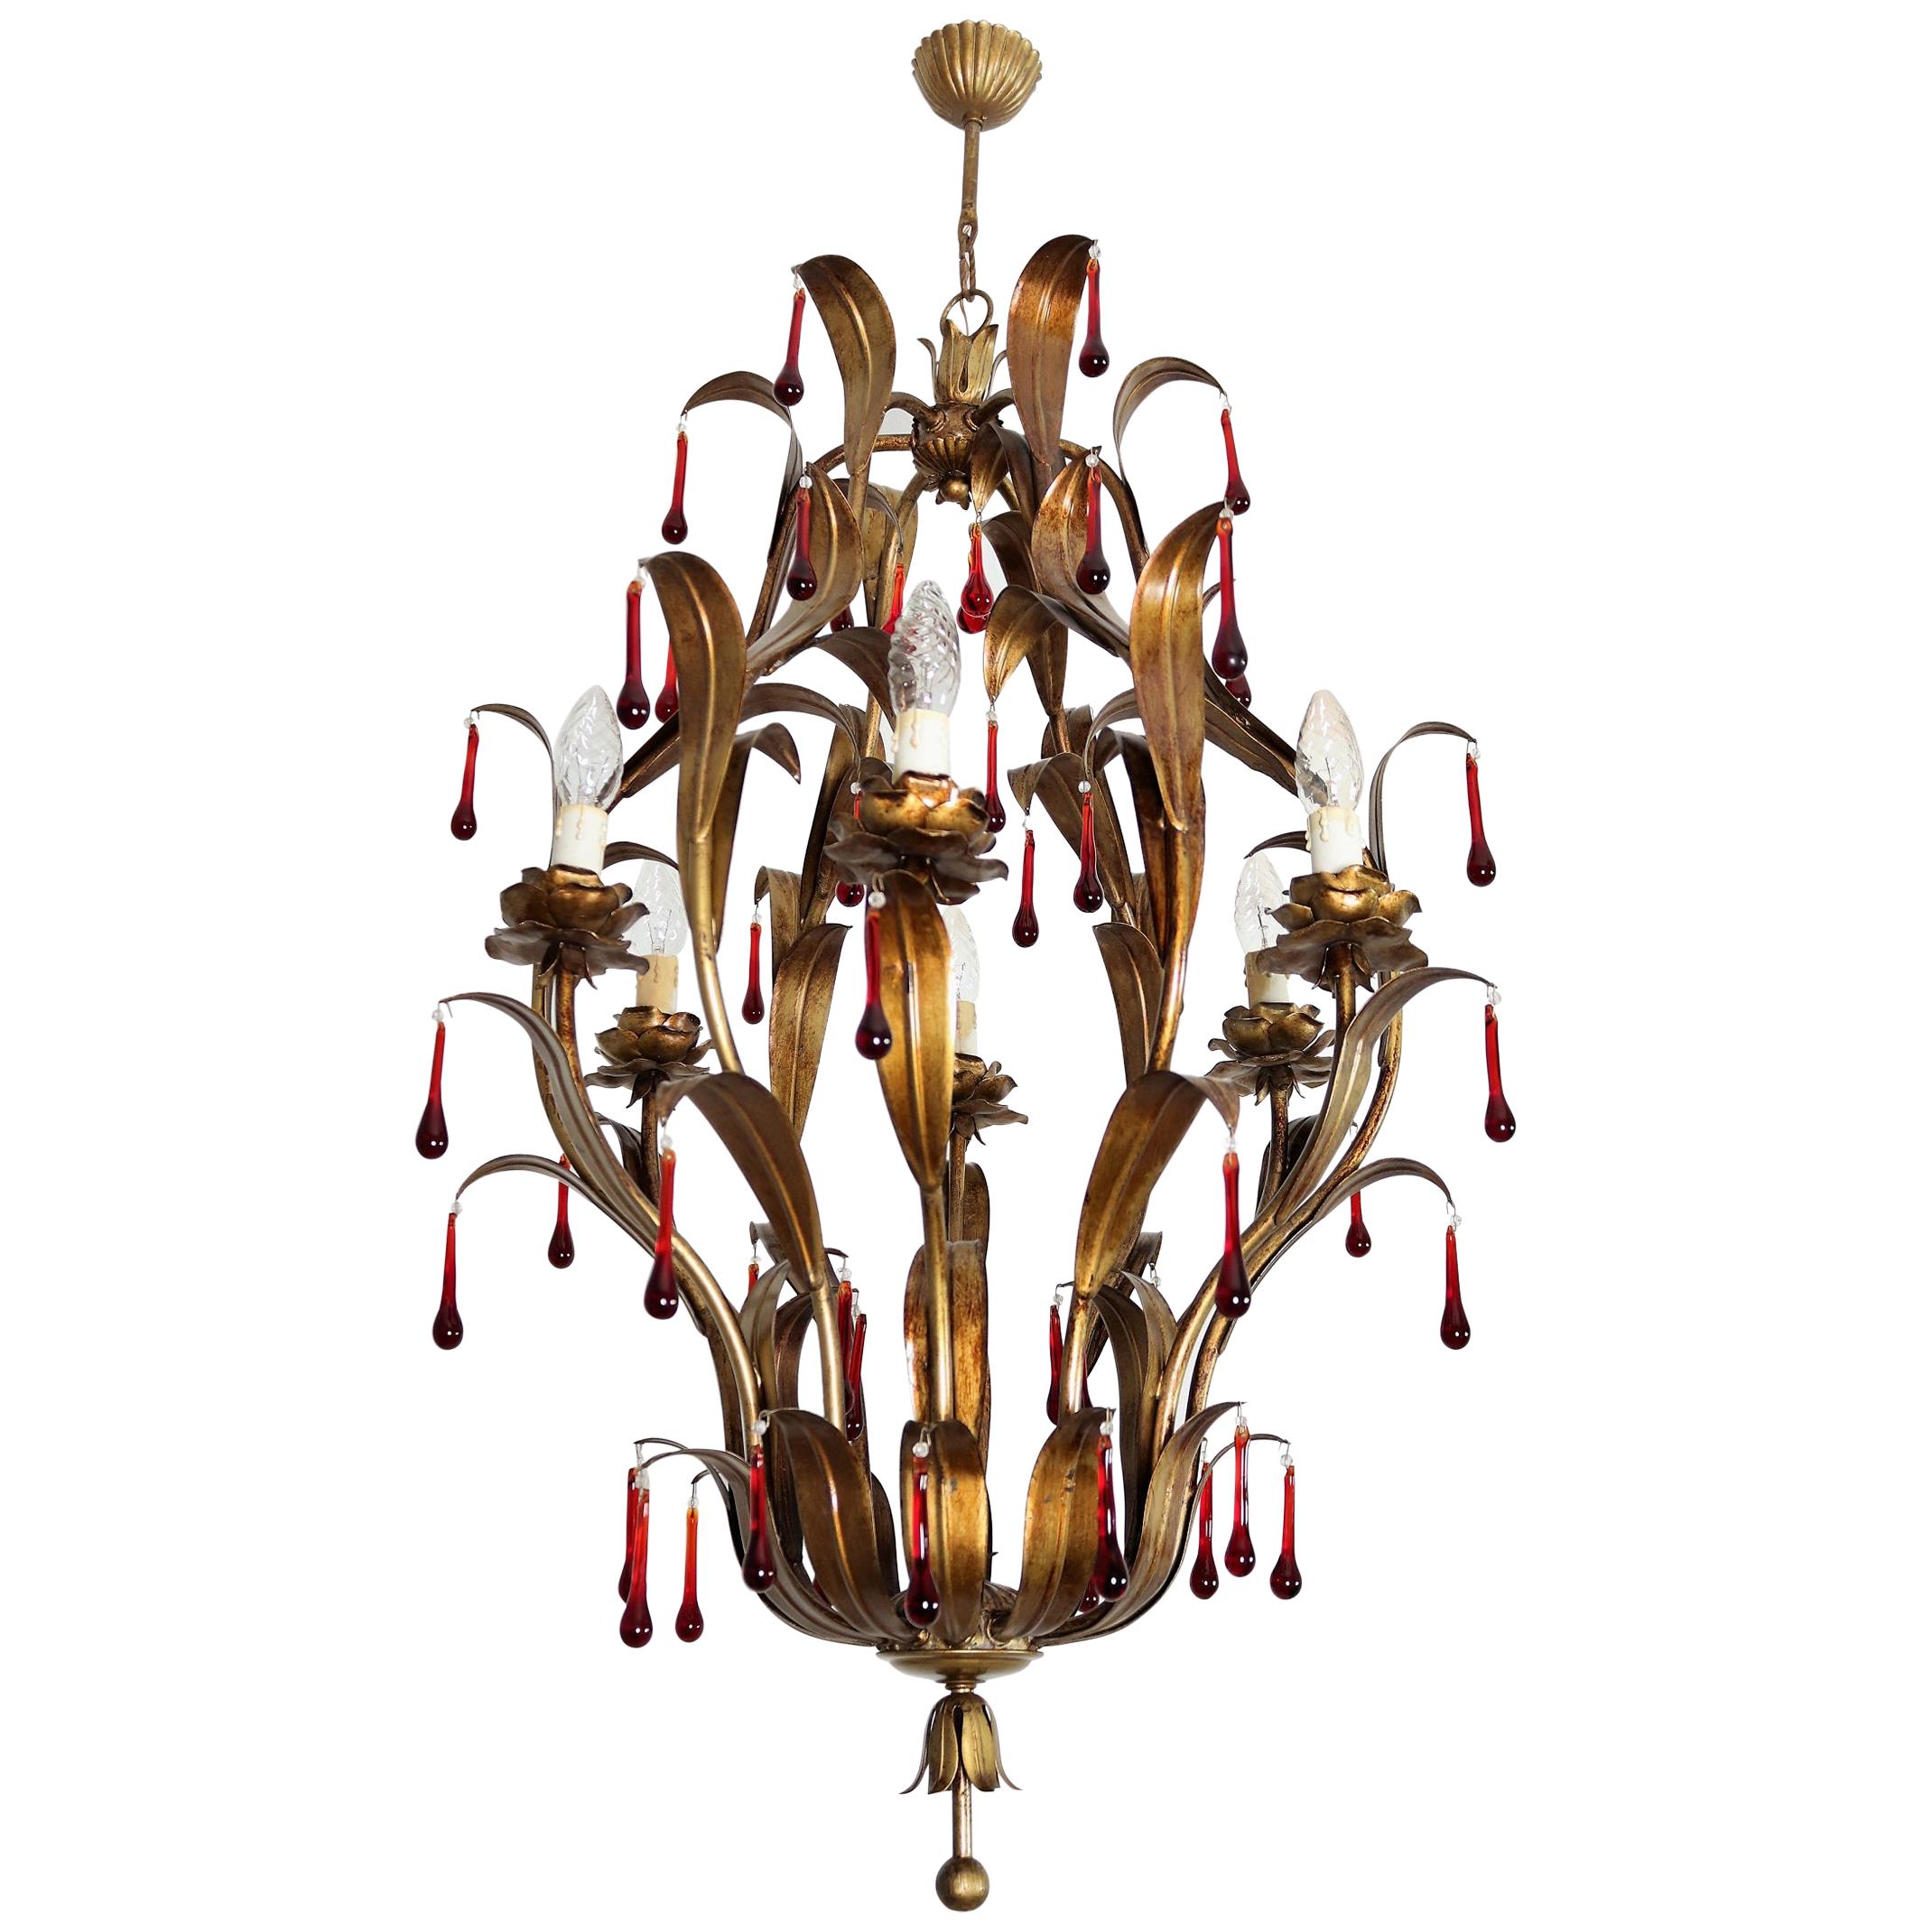 Italian Midcentury Gilt Florentine Chandelier with Red Murano Glass Drops, 1970s